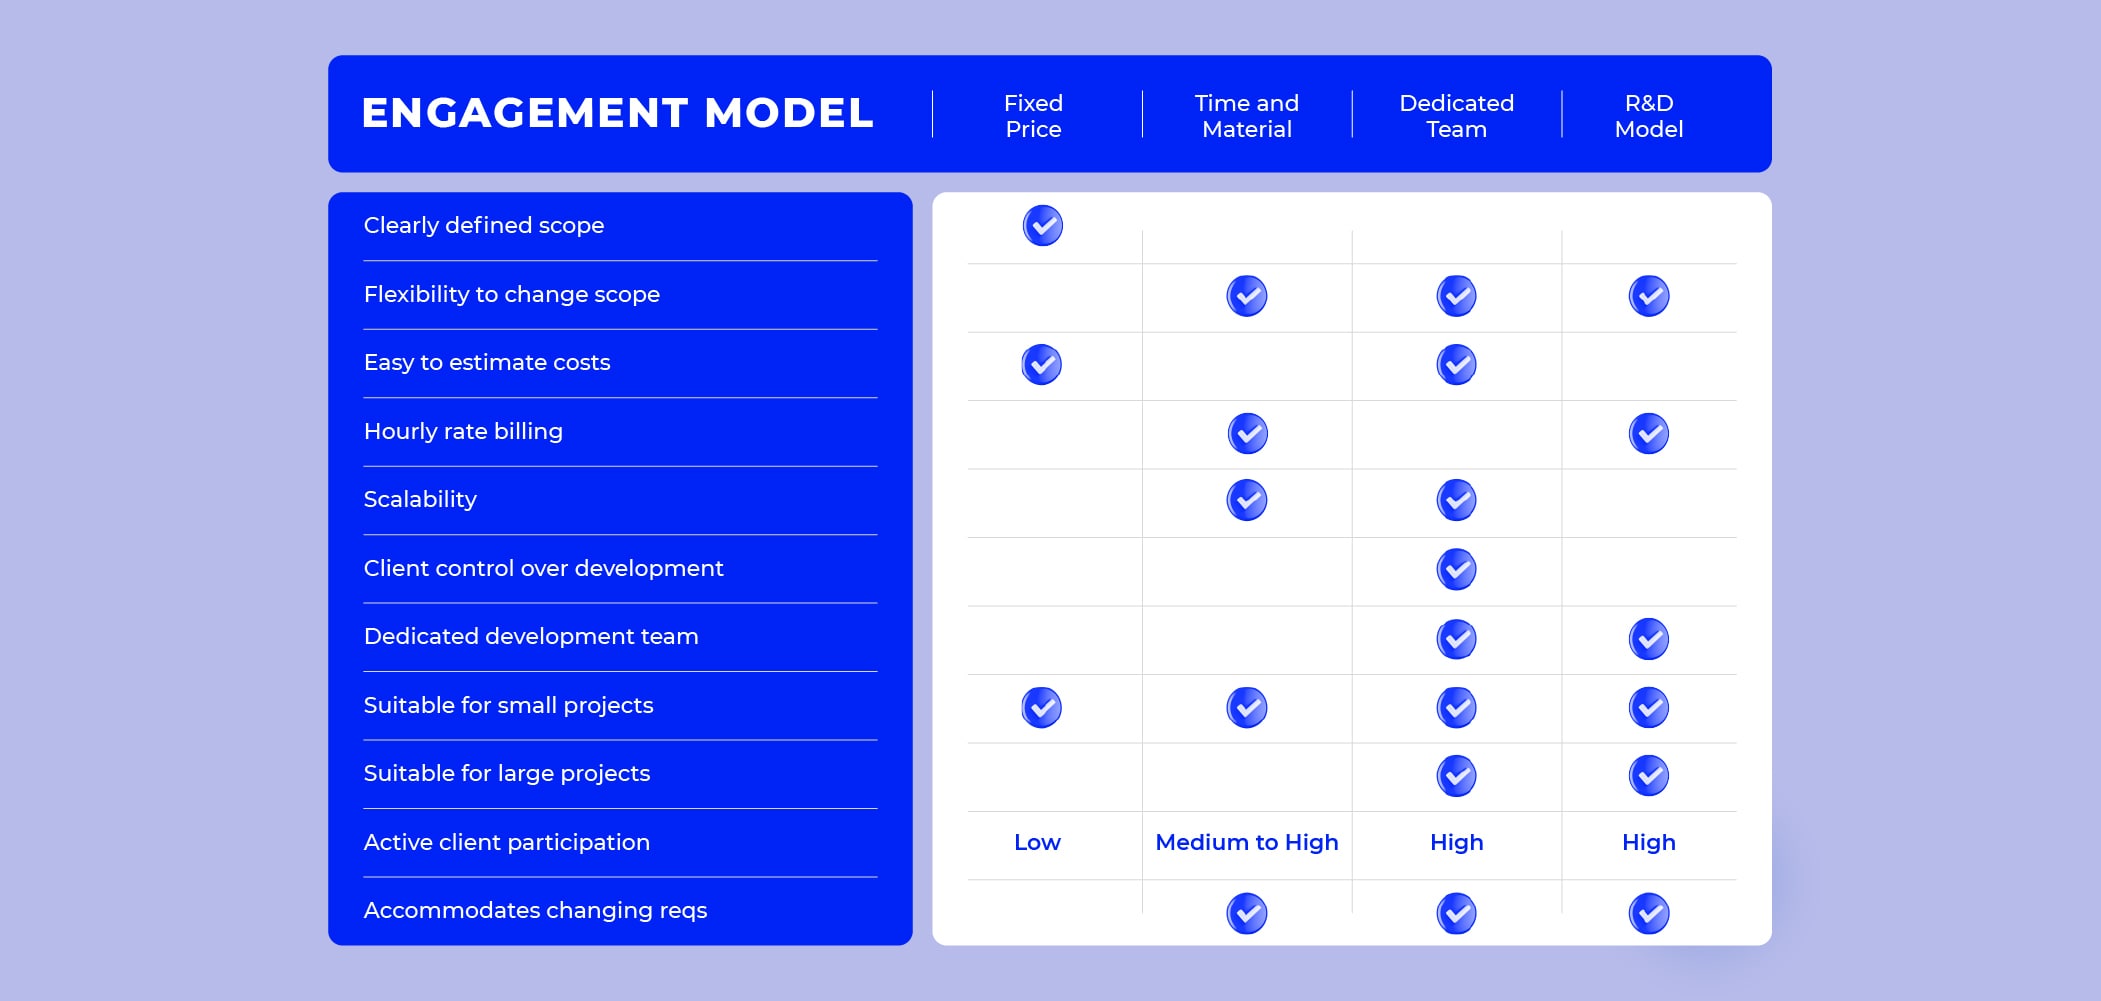 Choose a business engagement model that fits your business needs